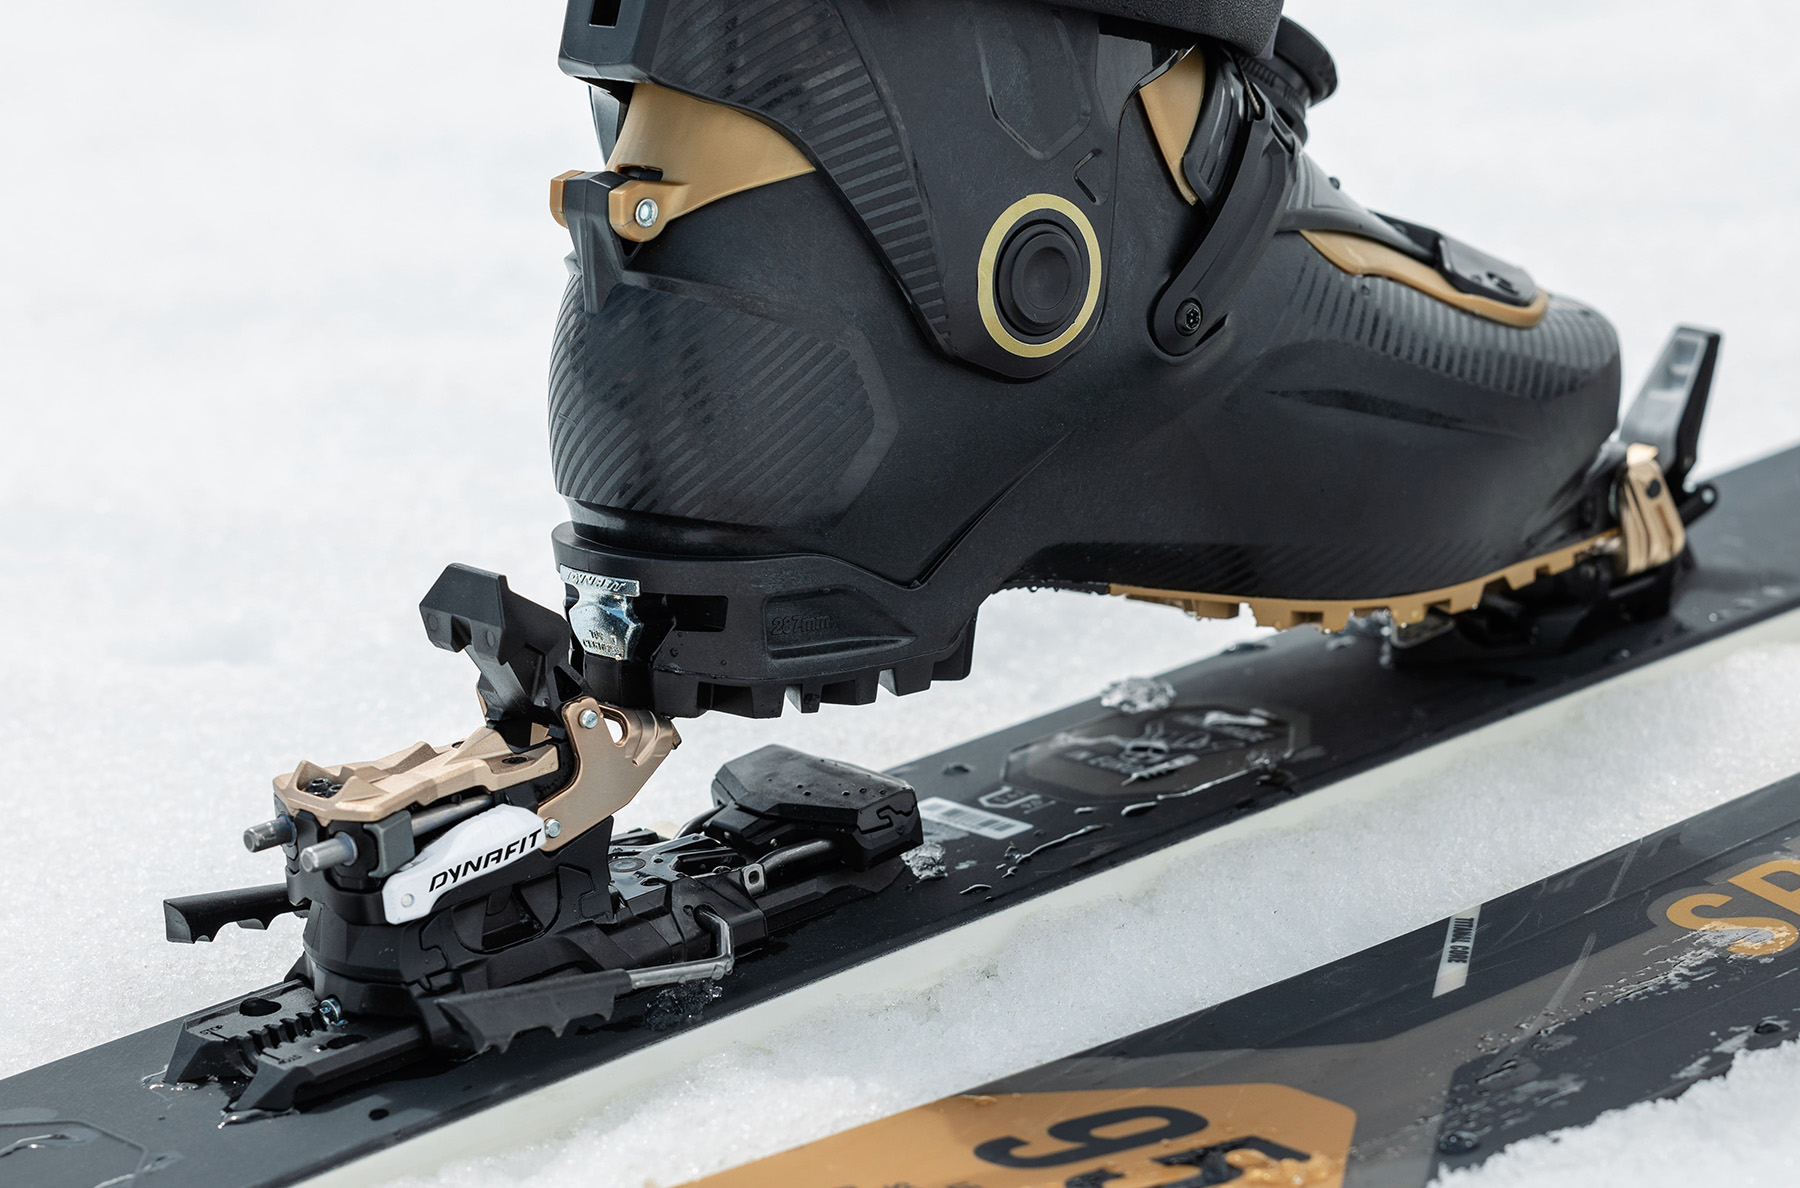 Dynafit announces new Ridge ski touring binding | BLISTER discusses the details of the new binding